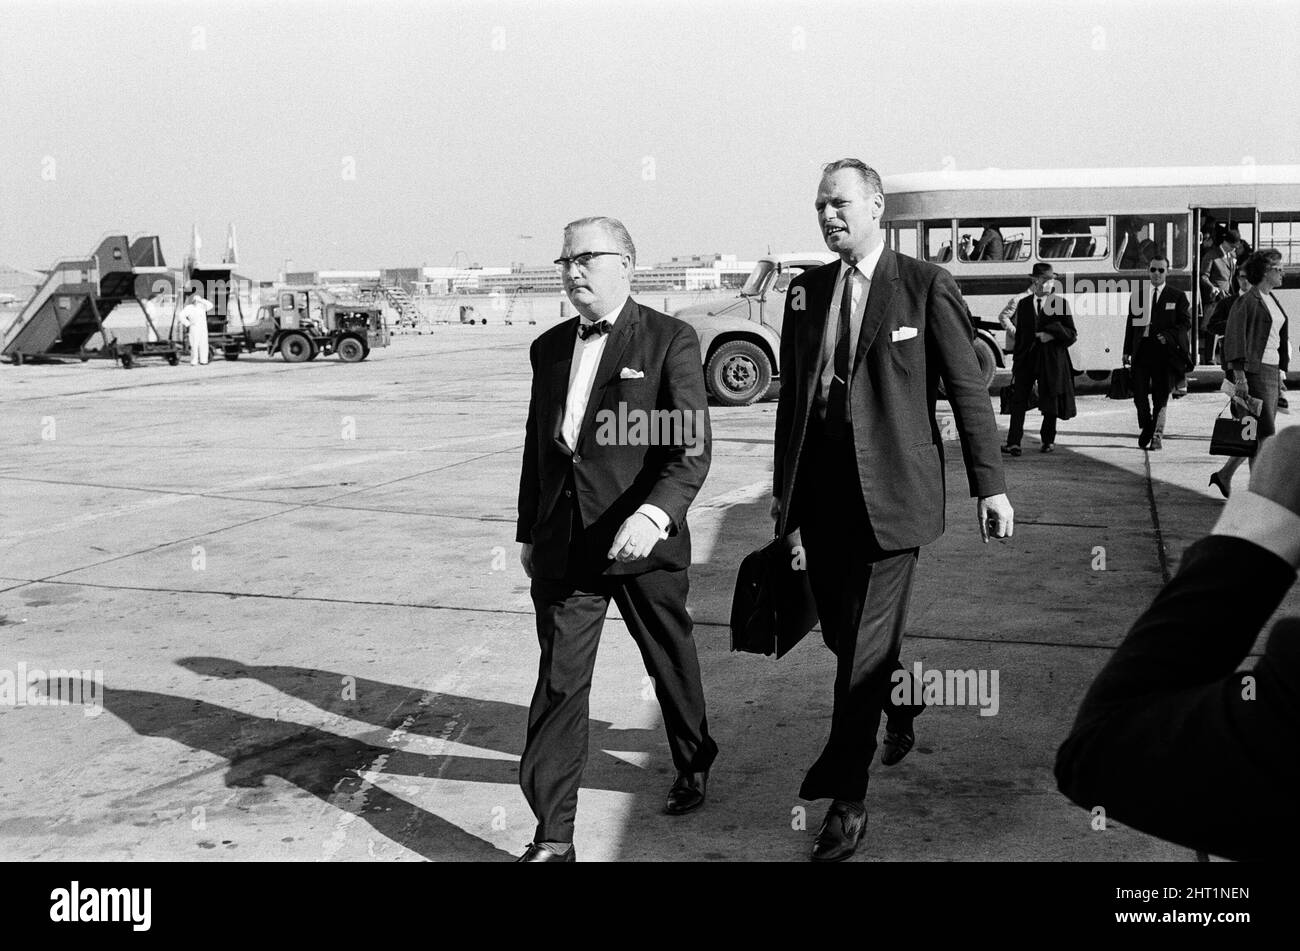 Detective Chief inspector John Hensley (wearing glasses) and Detective Inspector Jack Slipper leave London airport for Glasgow to bring John Duddy back to London. John Duddy was wanted for questioning in connection with the shooting of three London policemen. He later went on to be convicted of murder and possession of firearms and sentenced to life imprisonment. 18th August 1966. Stock Photo